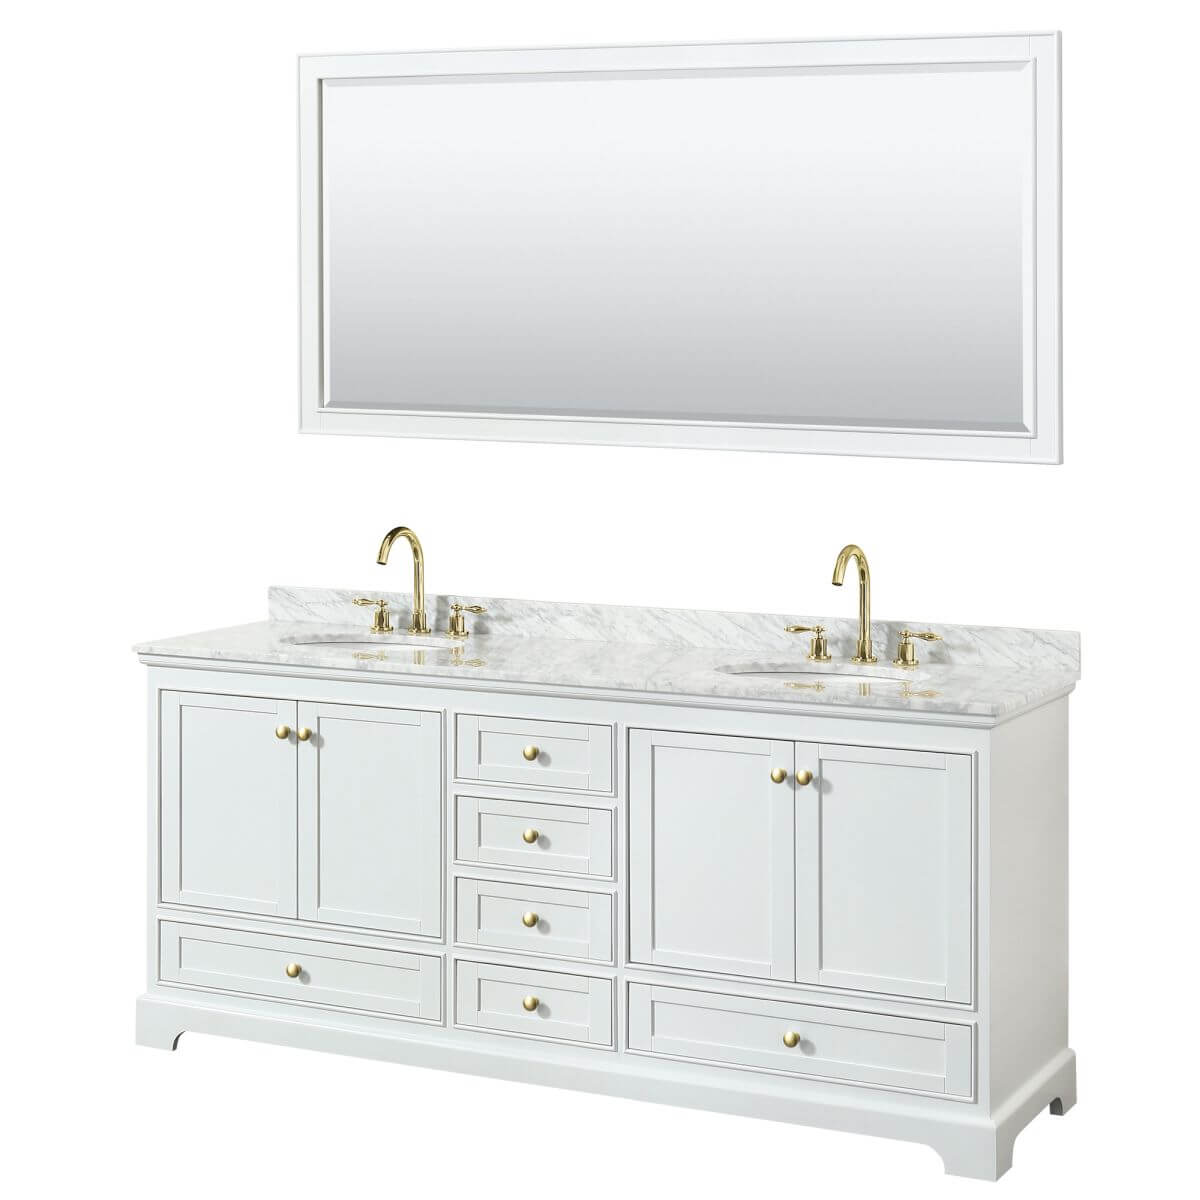 Wyndham Collection Deborah 80 inch Double Bathroom Vanity in White with White Carrara Marble Countertop, Undermount Oval Sinks, Brushed Gold Trim and 70 inch Mirror - WCS202080DWGCMUNOM70